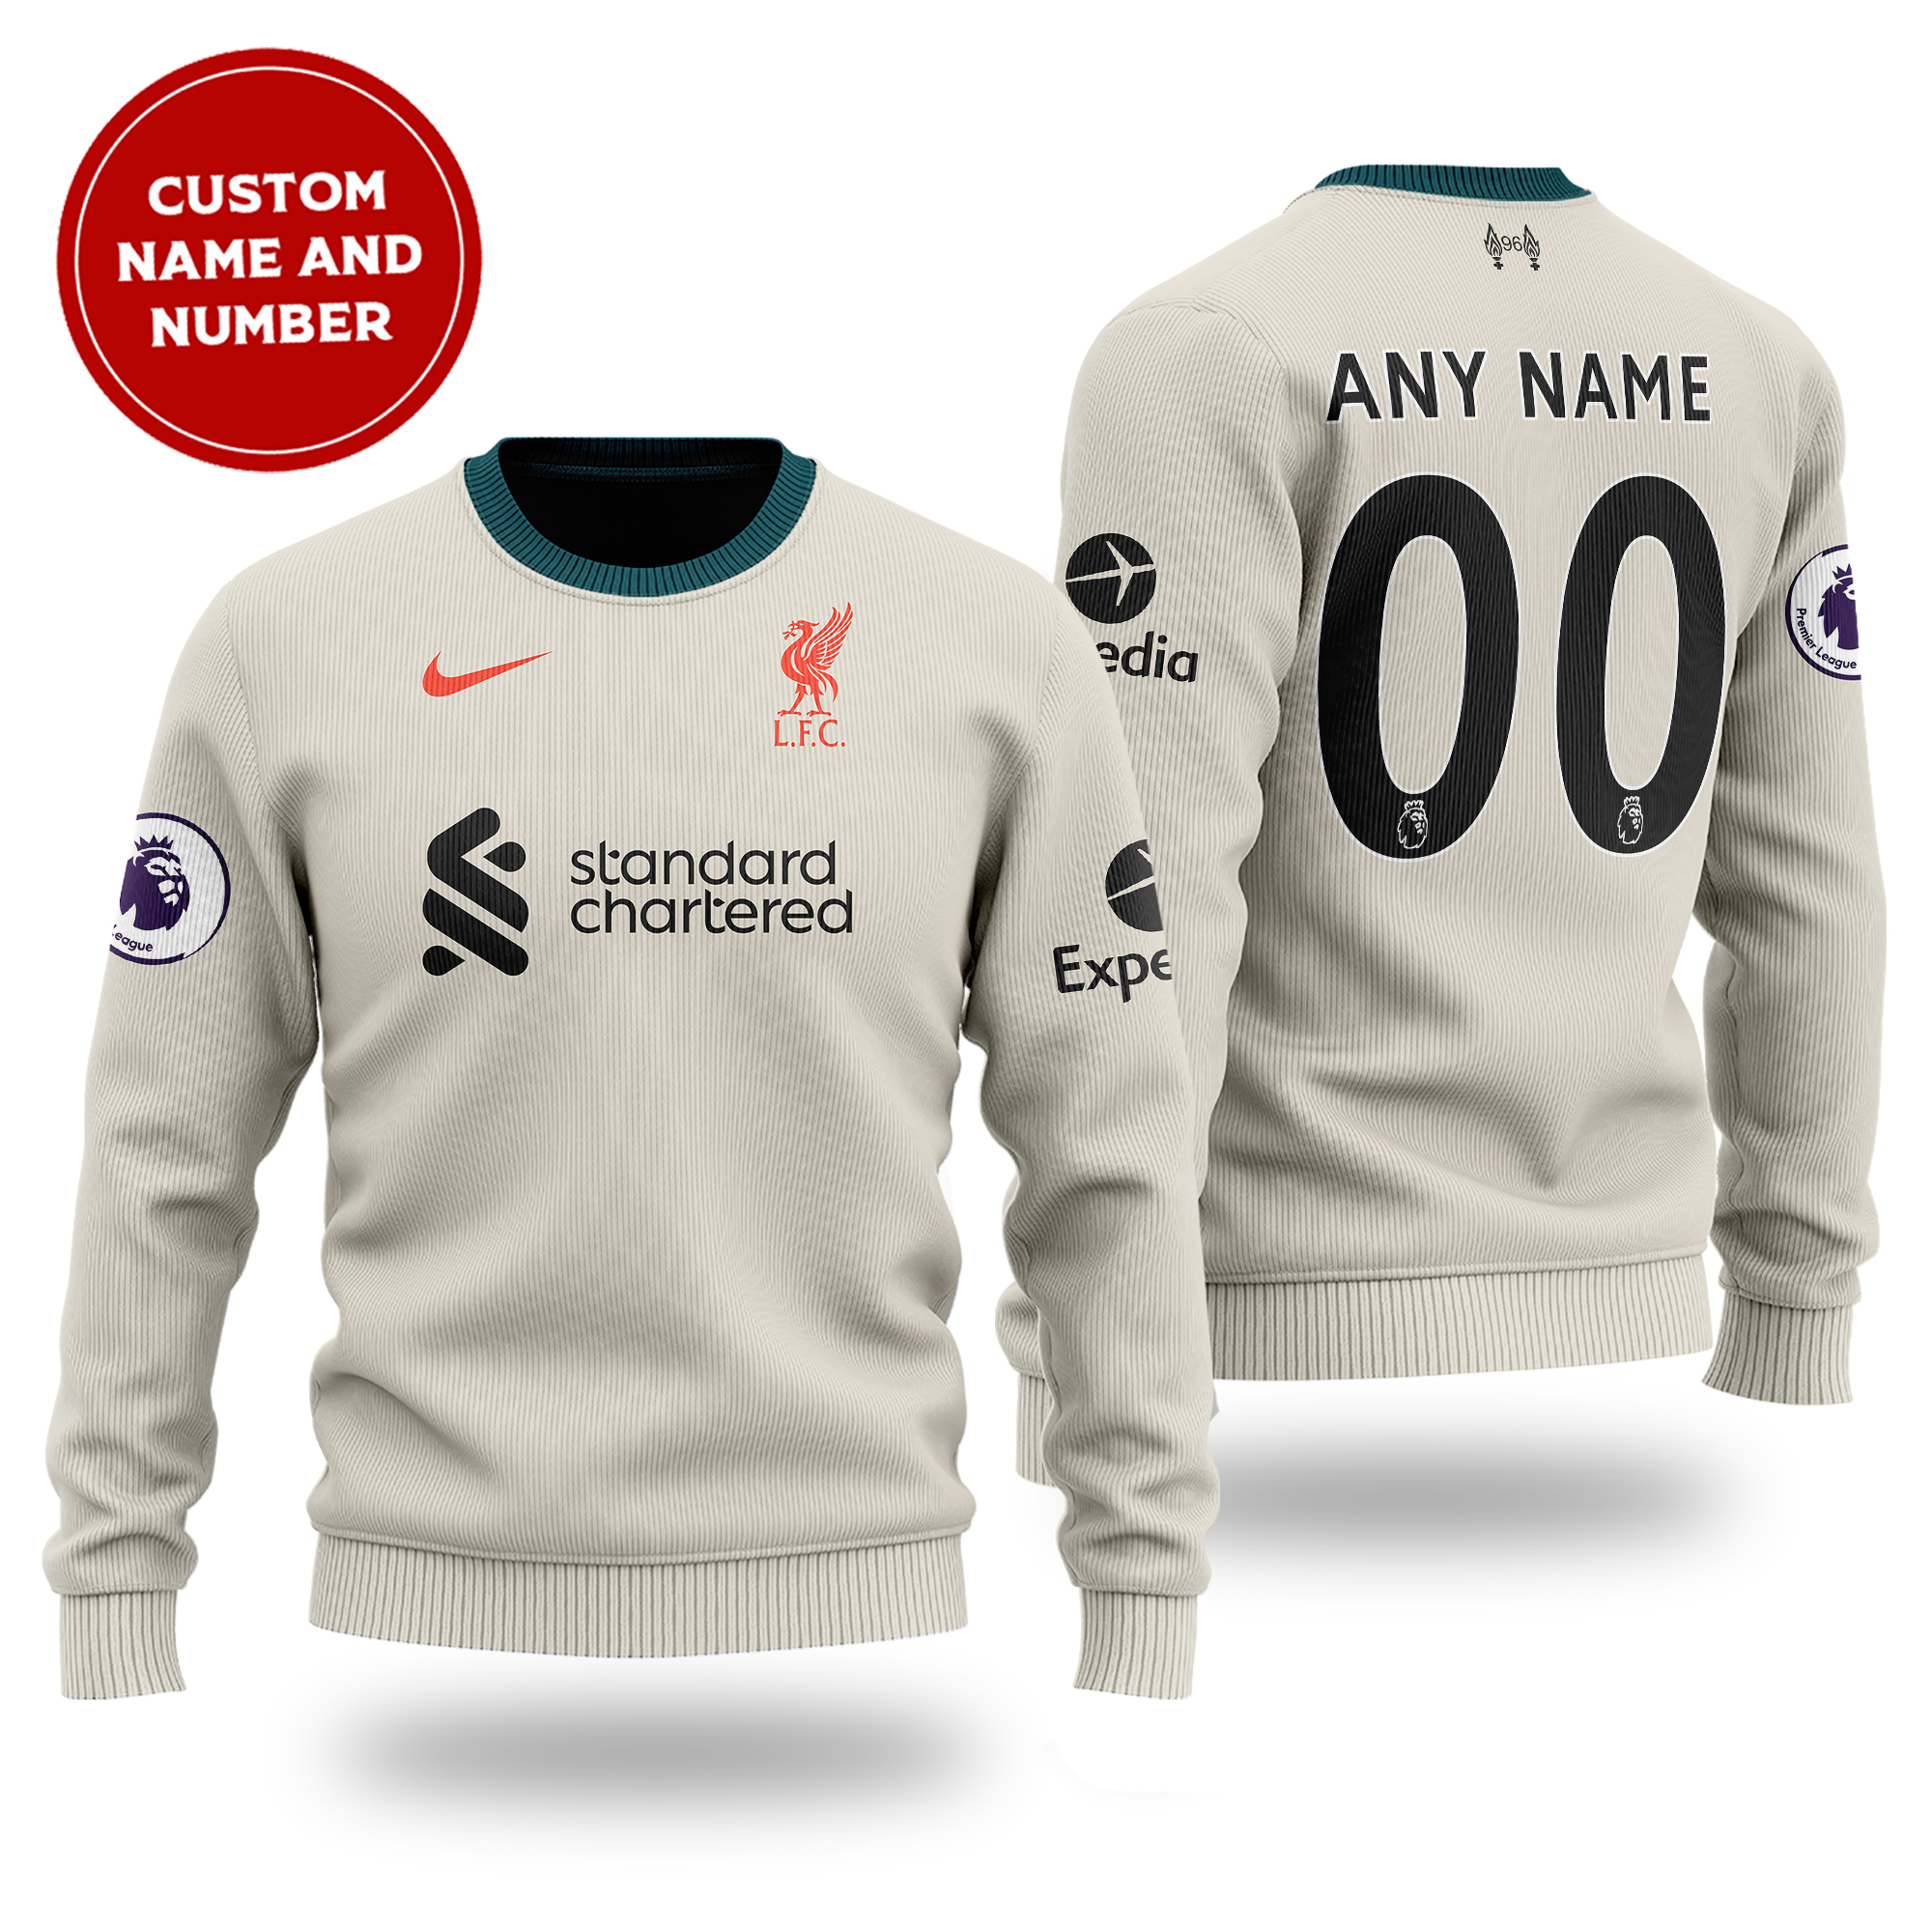 Primier League Liverpool FC away kit cutom name and number sweater